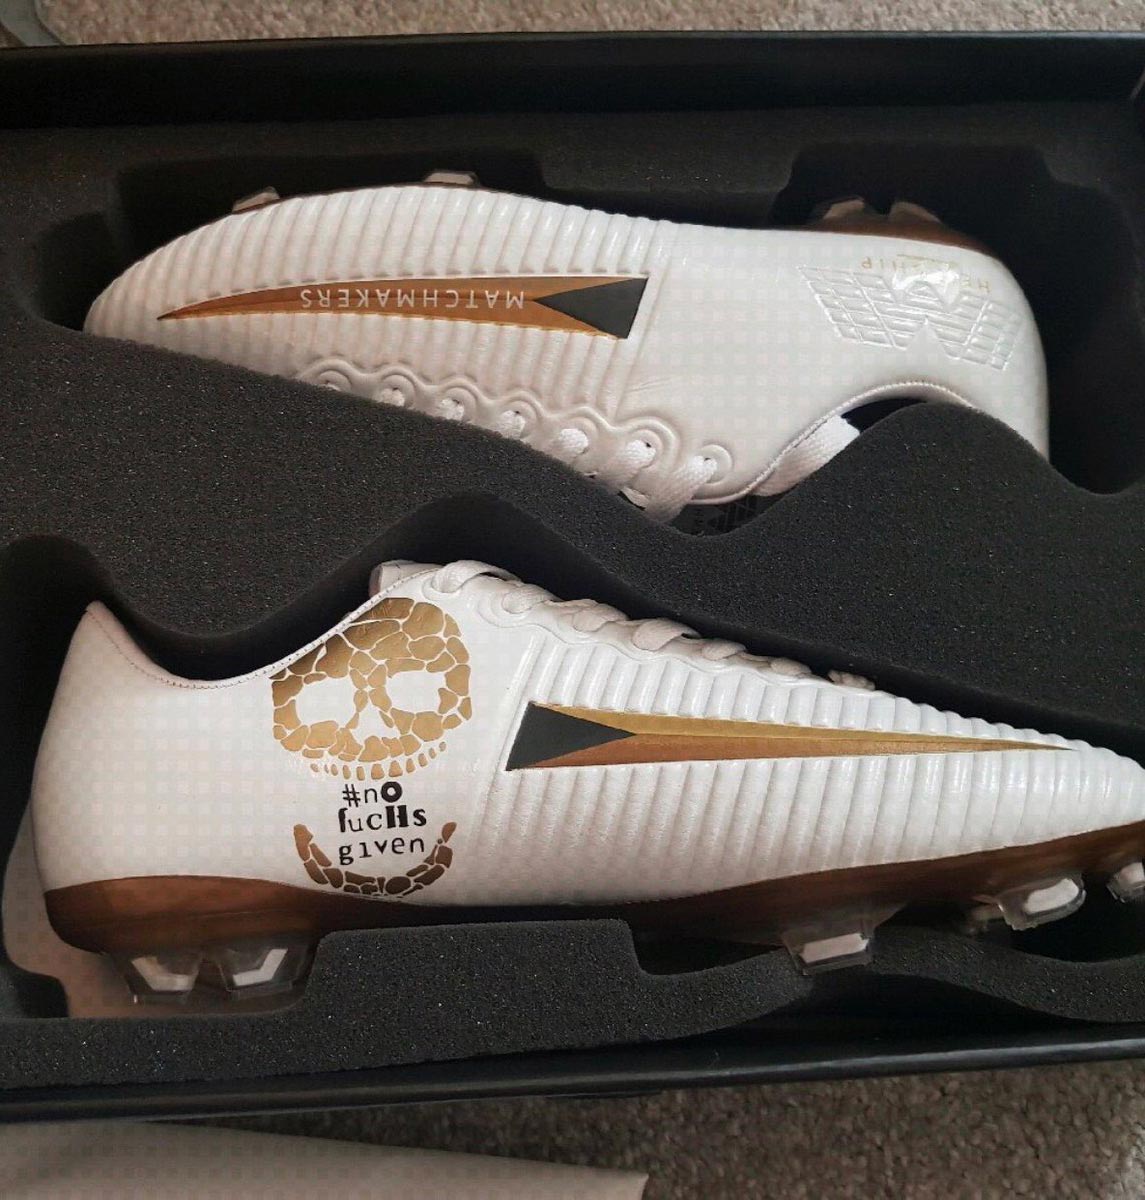 RIDICULOUS | Leicester City's Fuchs Switches To Stylo Matchmakers Boots ...